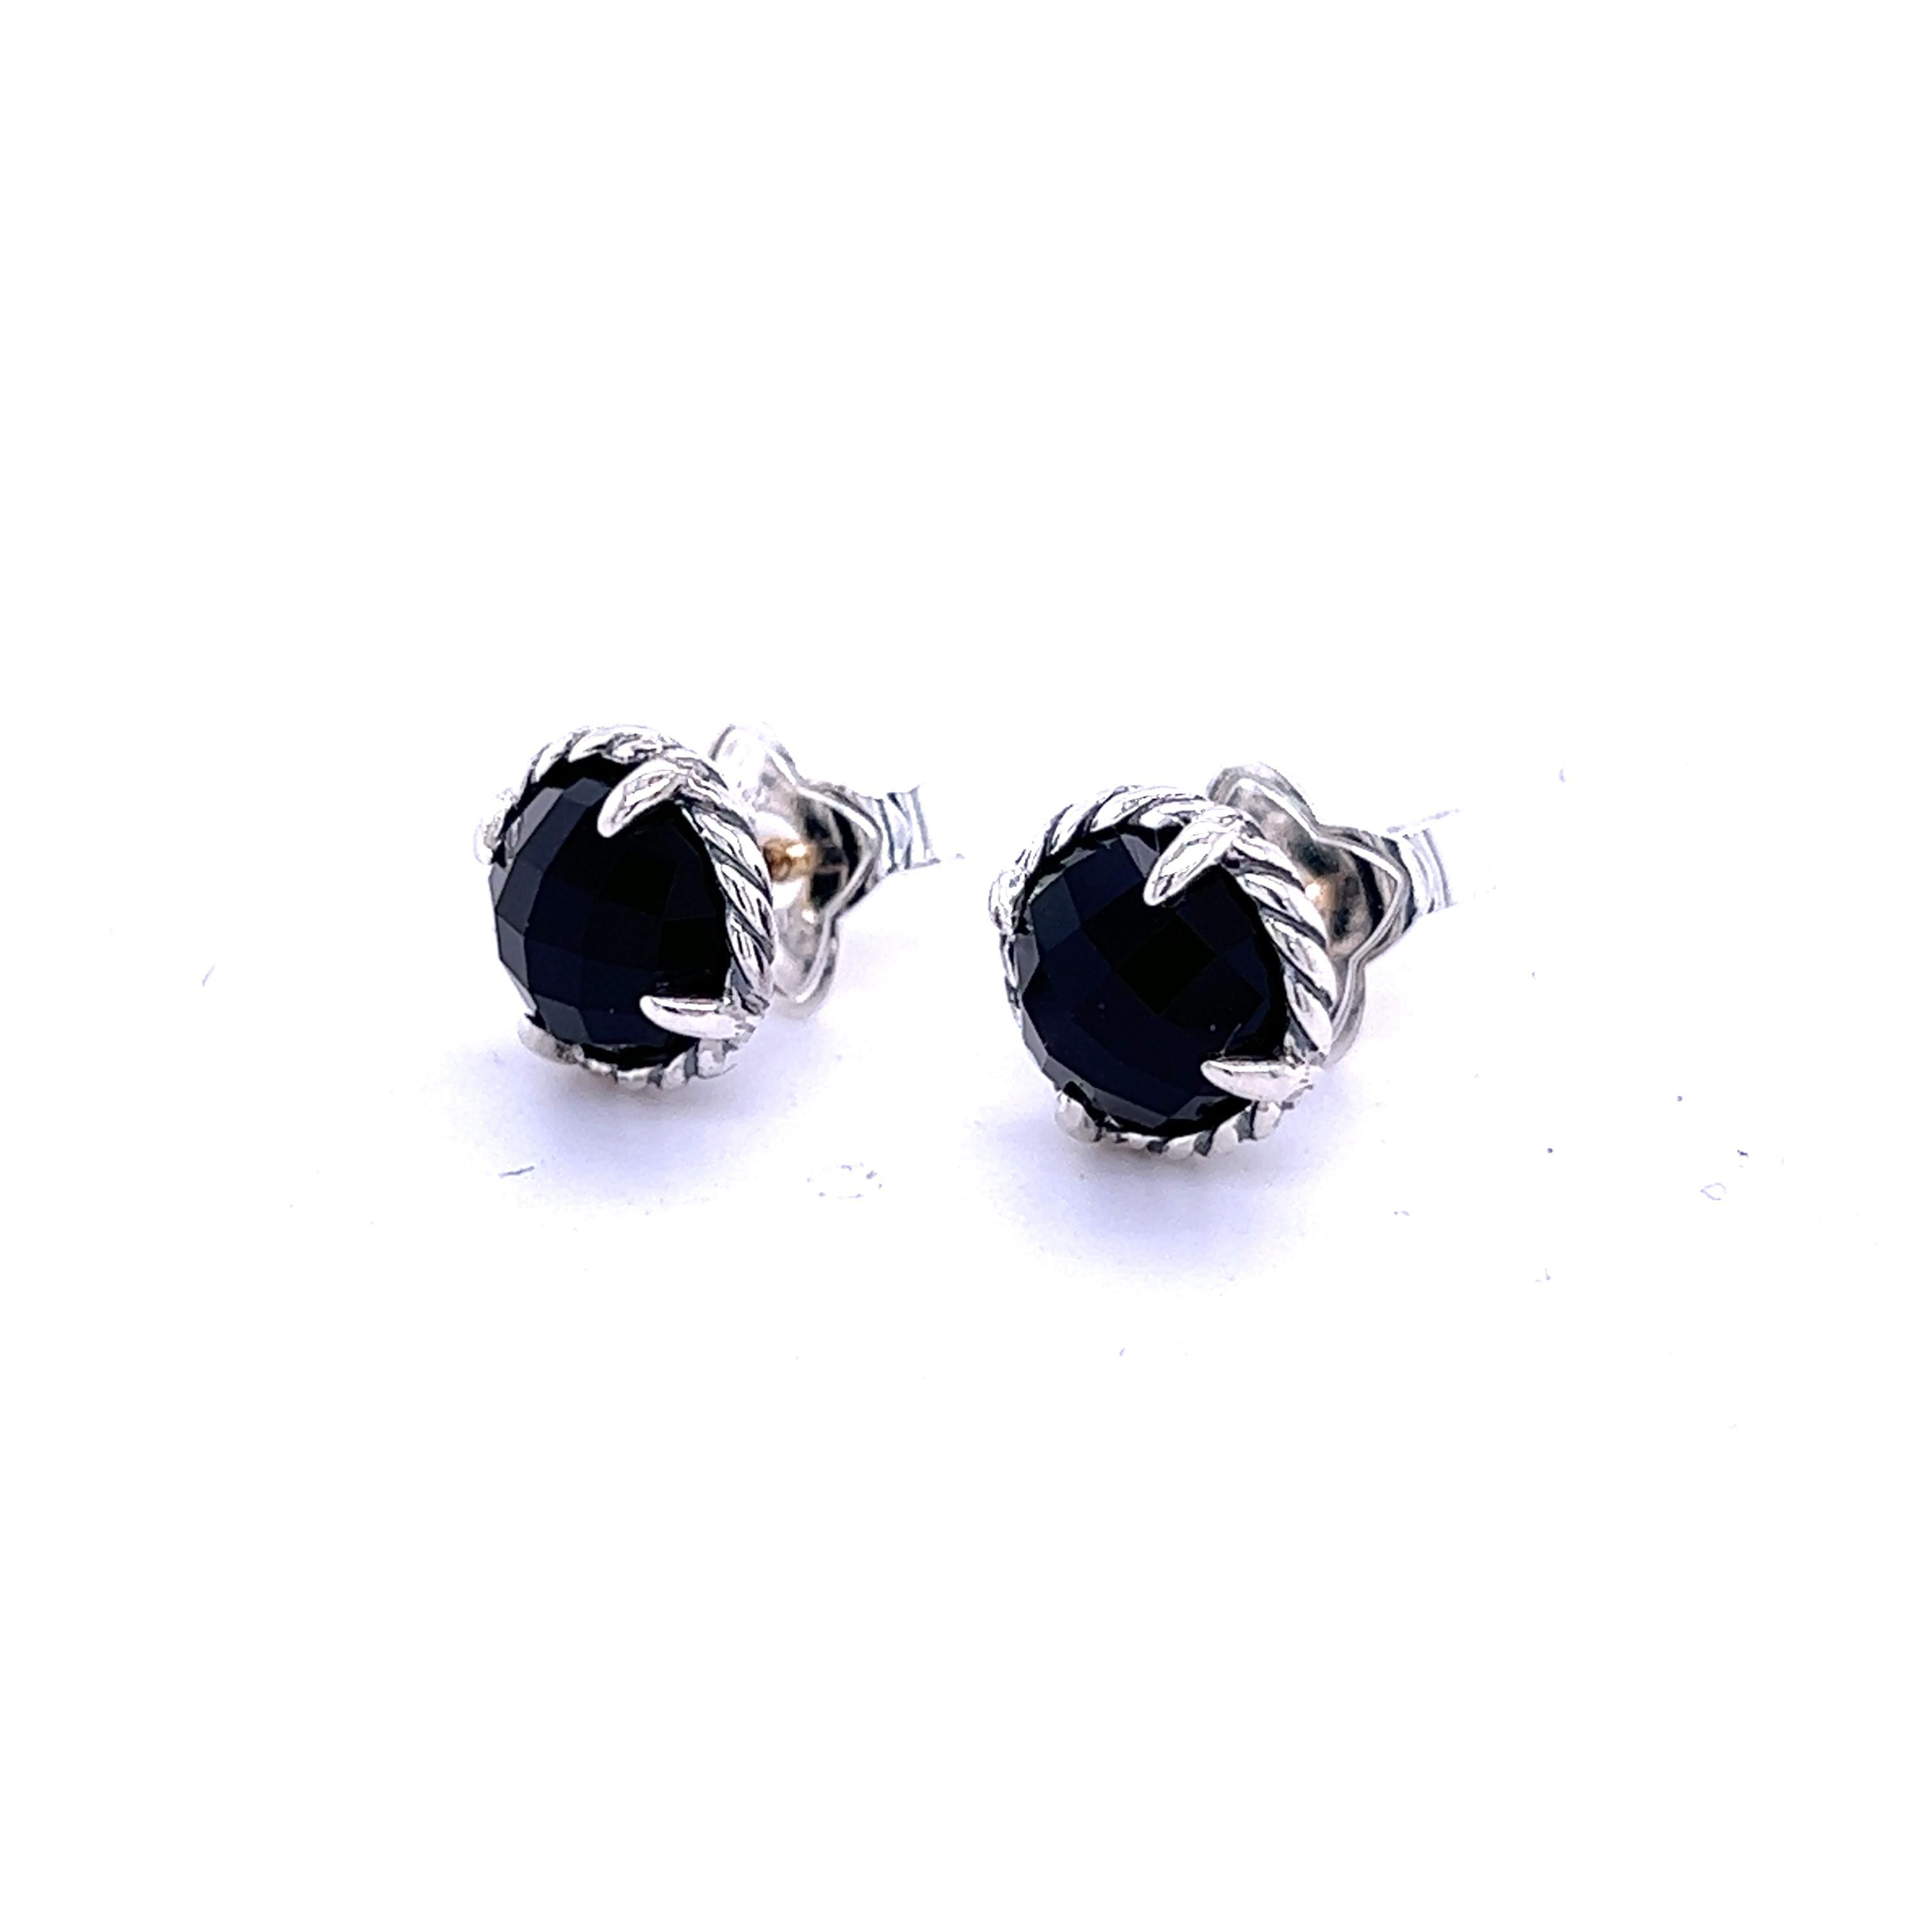 Authentic David Yurman Estate Black Orquid Chantelaine Earrings Silver DY237

Retail: $475.00

TRUSTED SELLER SINCE 2002

PLEASE SEE OUR HUNDREDS OF POSITIVE FEEDBACKS FROM OUR CLIENTS!!

FREE SHIPPING

This elegant Authentic David Yurman sterling